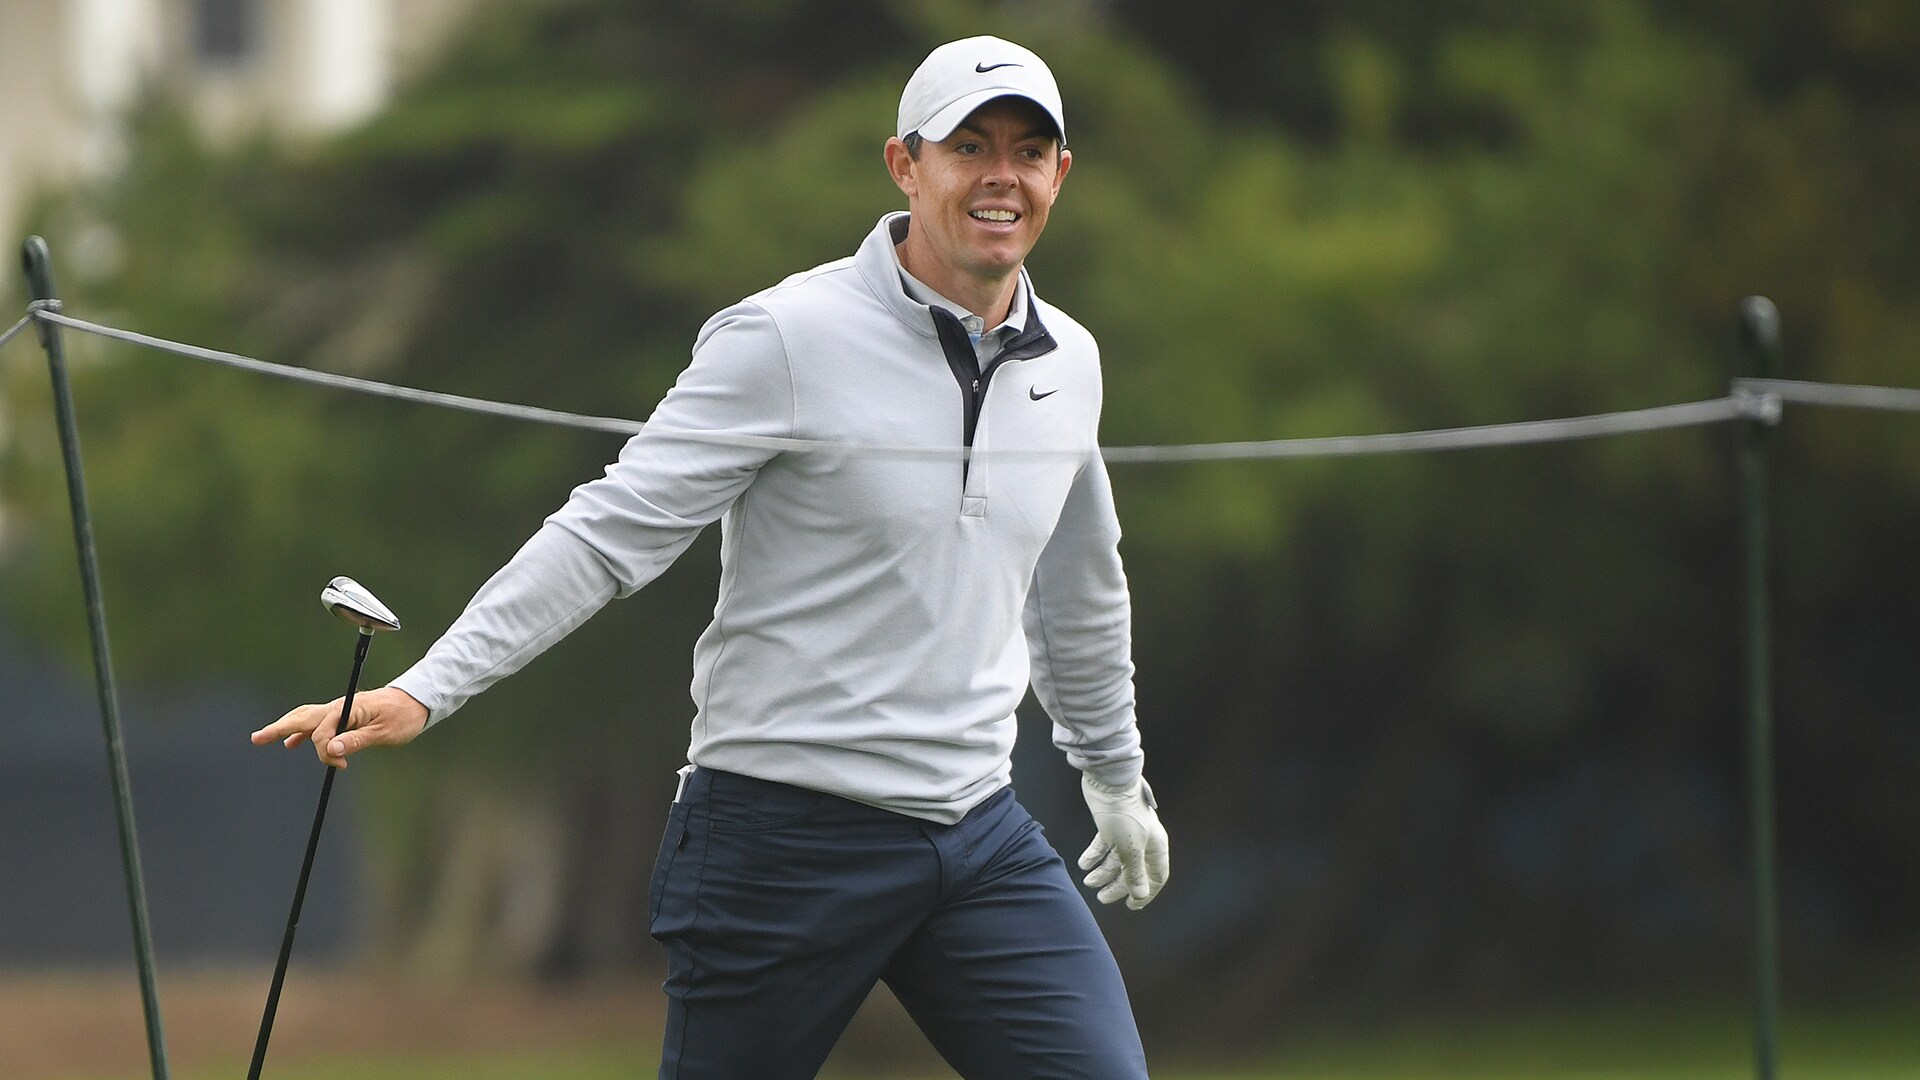 Rory McIlroy has not paid a greens fee in a very, very long time